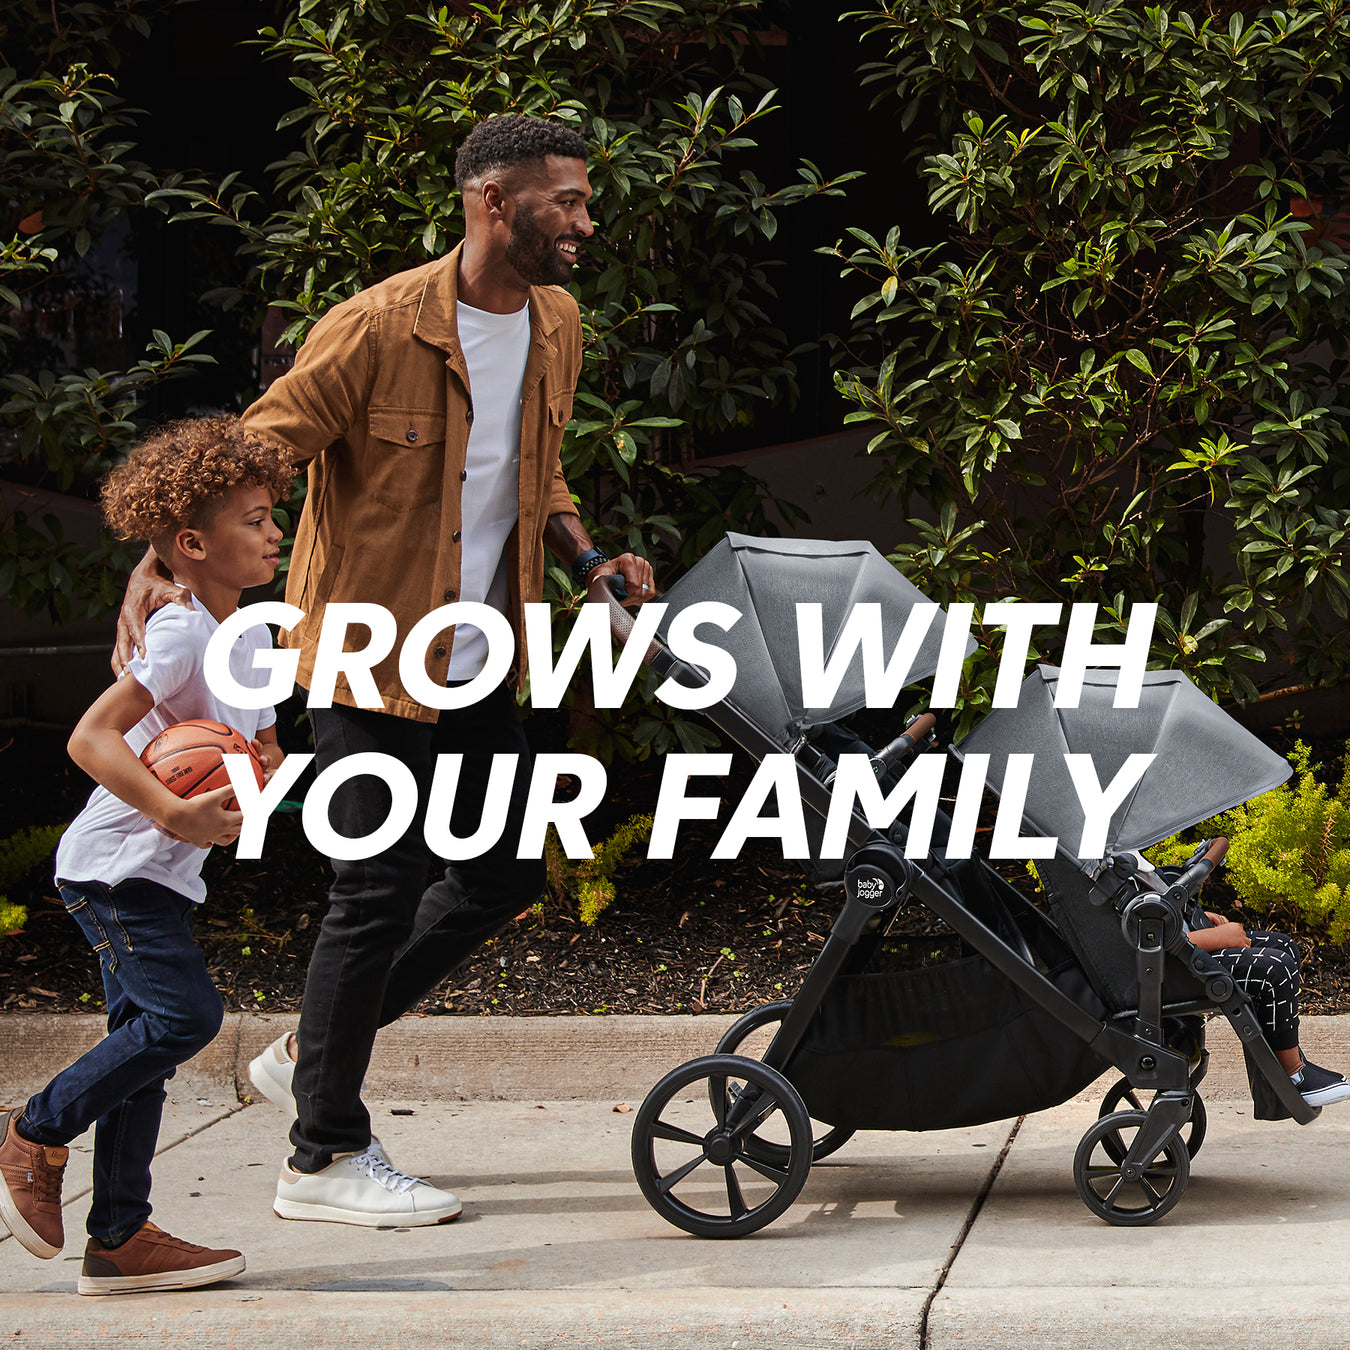 Grows with your family